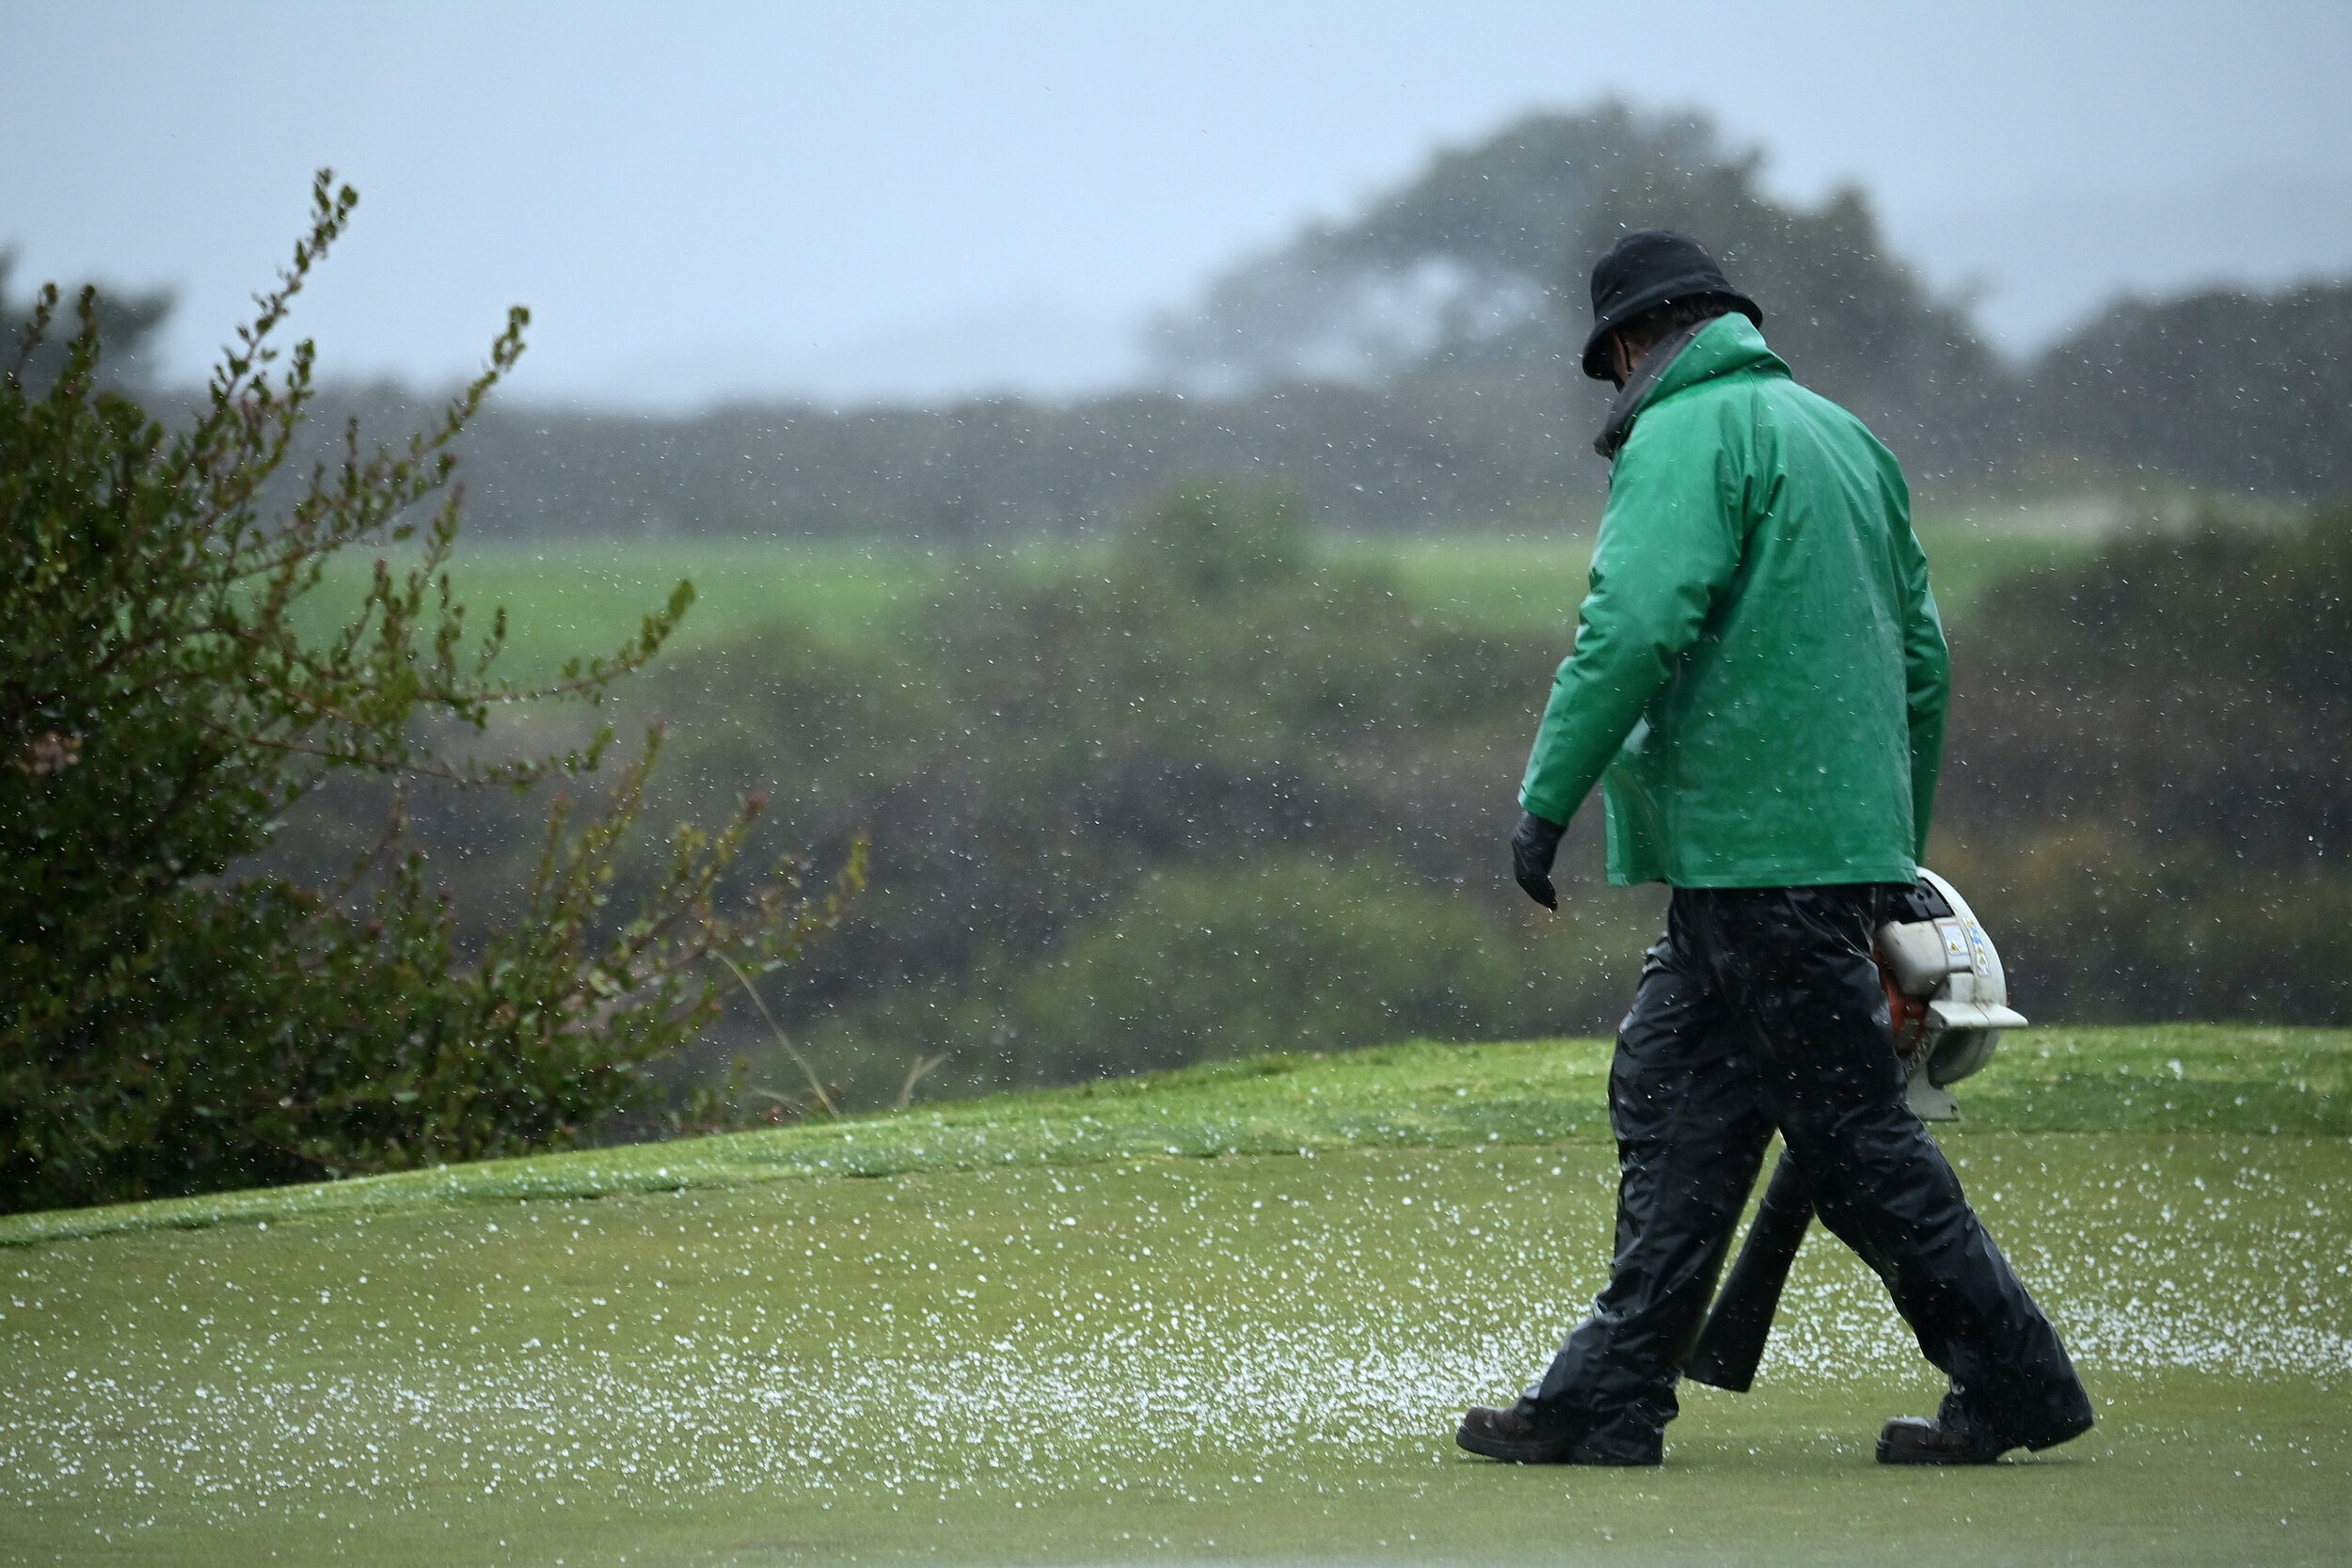  SAN DIEGO, CALIFORNIA - JANUARY 29: A groundskeeper clears hailstones off 17th hole green during round two of the Farmers Insurance Open at Torrey Pines on January 29, 2021 in San Diego, California. (Photo by Donald Miralle/Getty Images) 